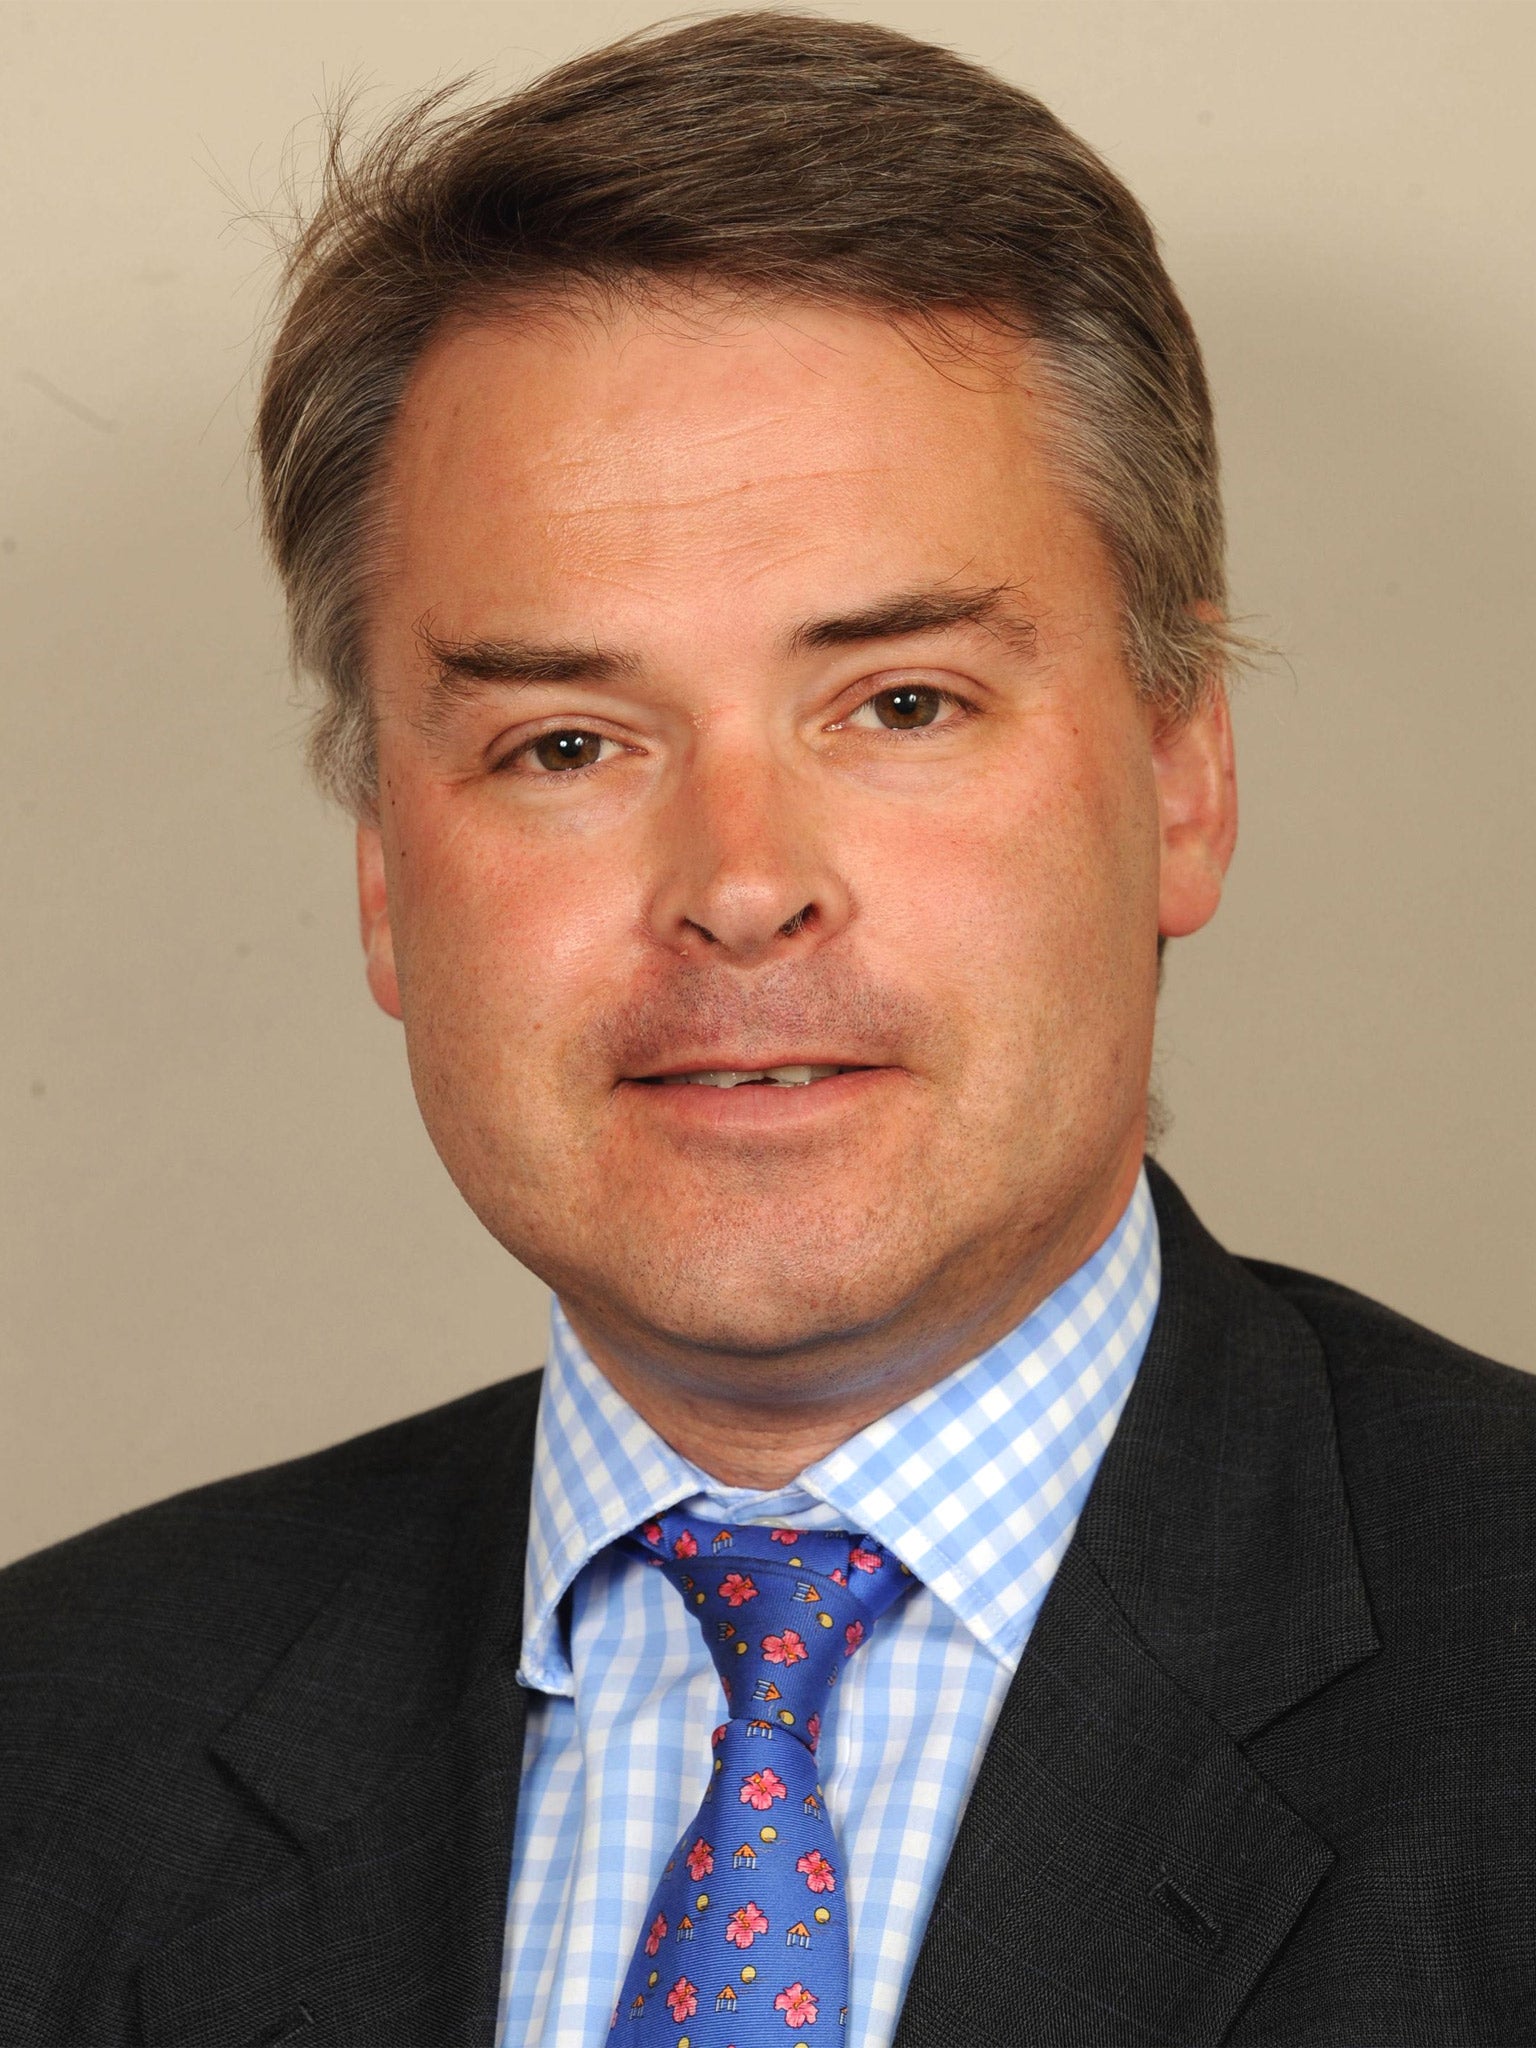 Tim Loughton tabled parliamentary questions about Cummings